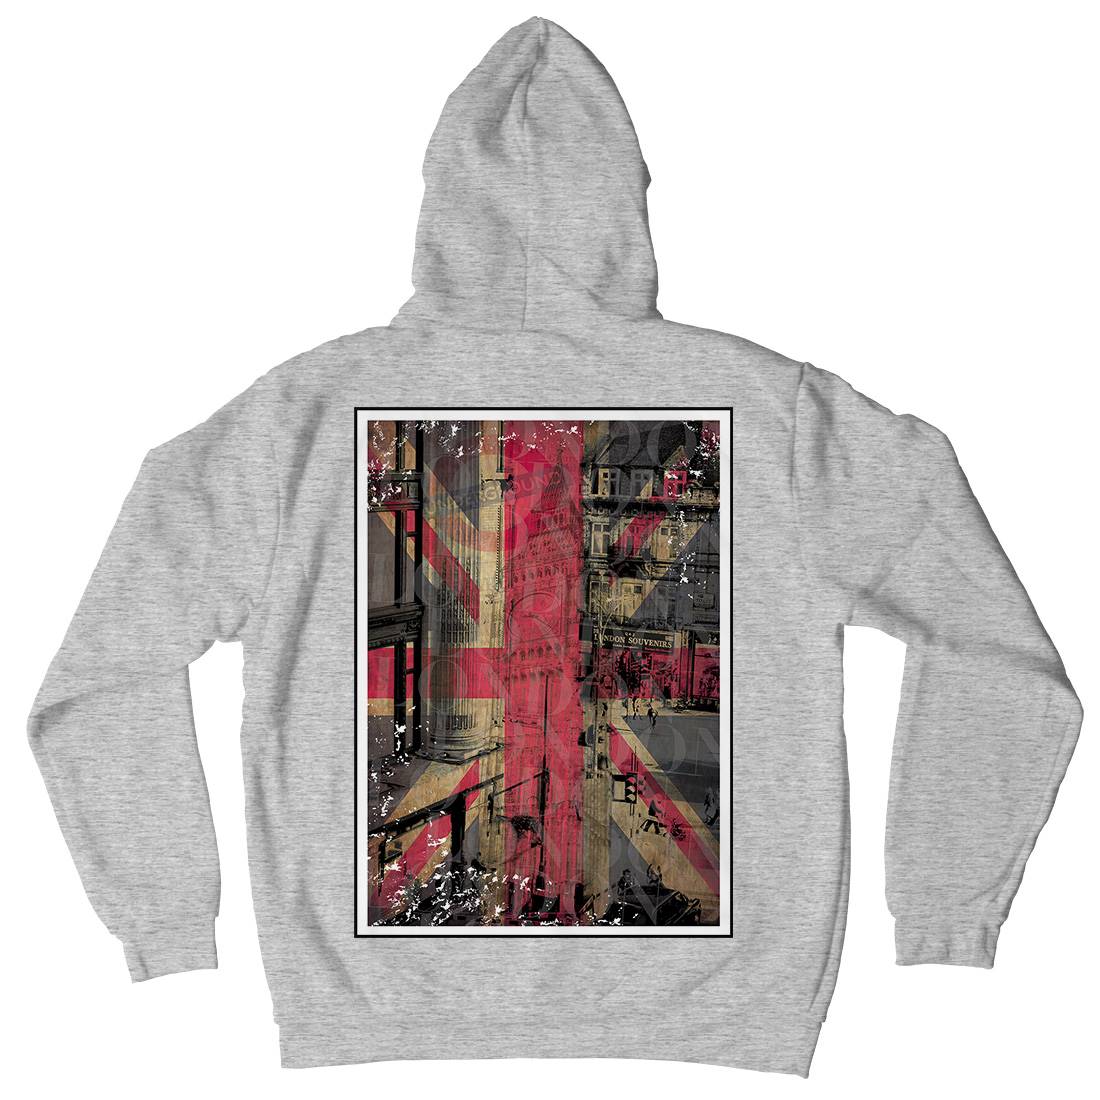 Flag Mens Hoodie With Pocket Art A859